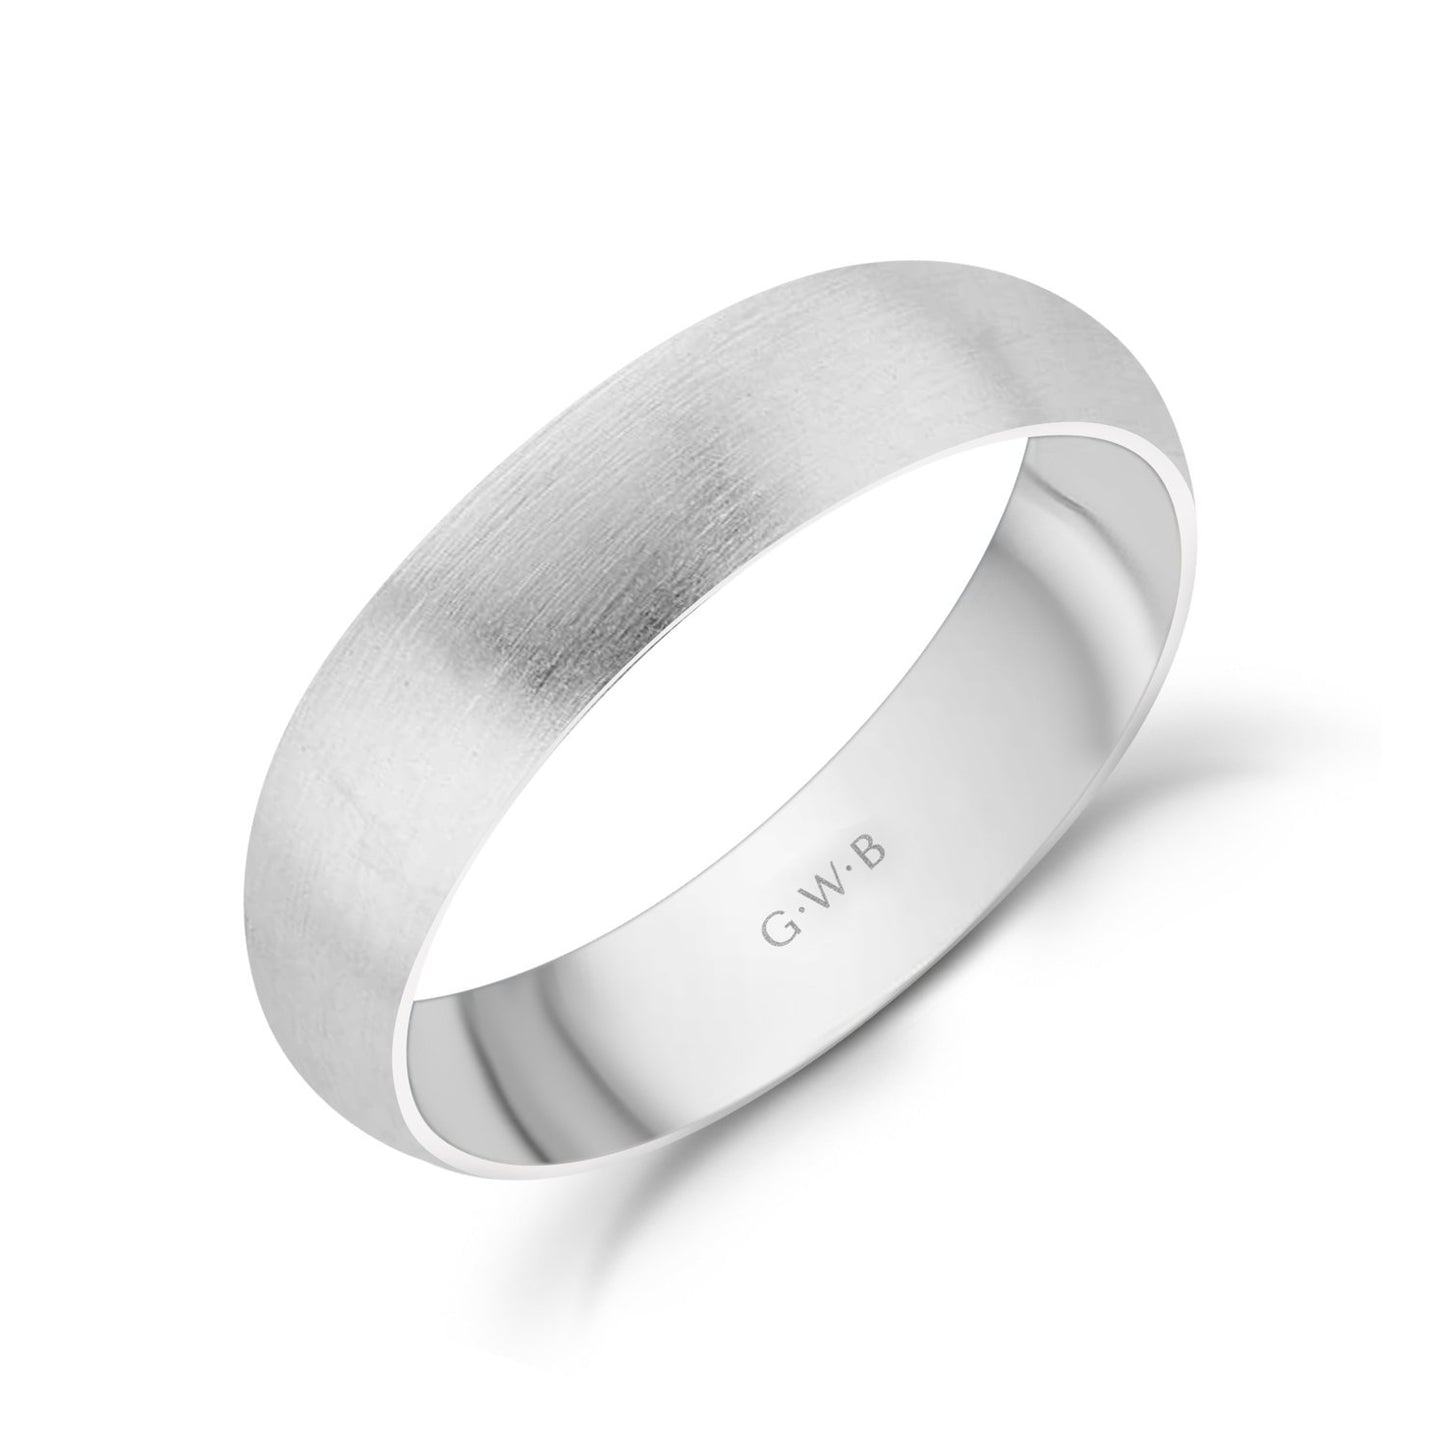 5mm 10K Gold Brushed Dome Wedding Band - G.W Bands